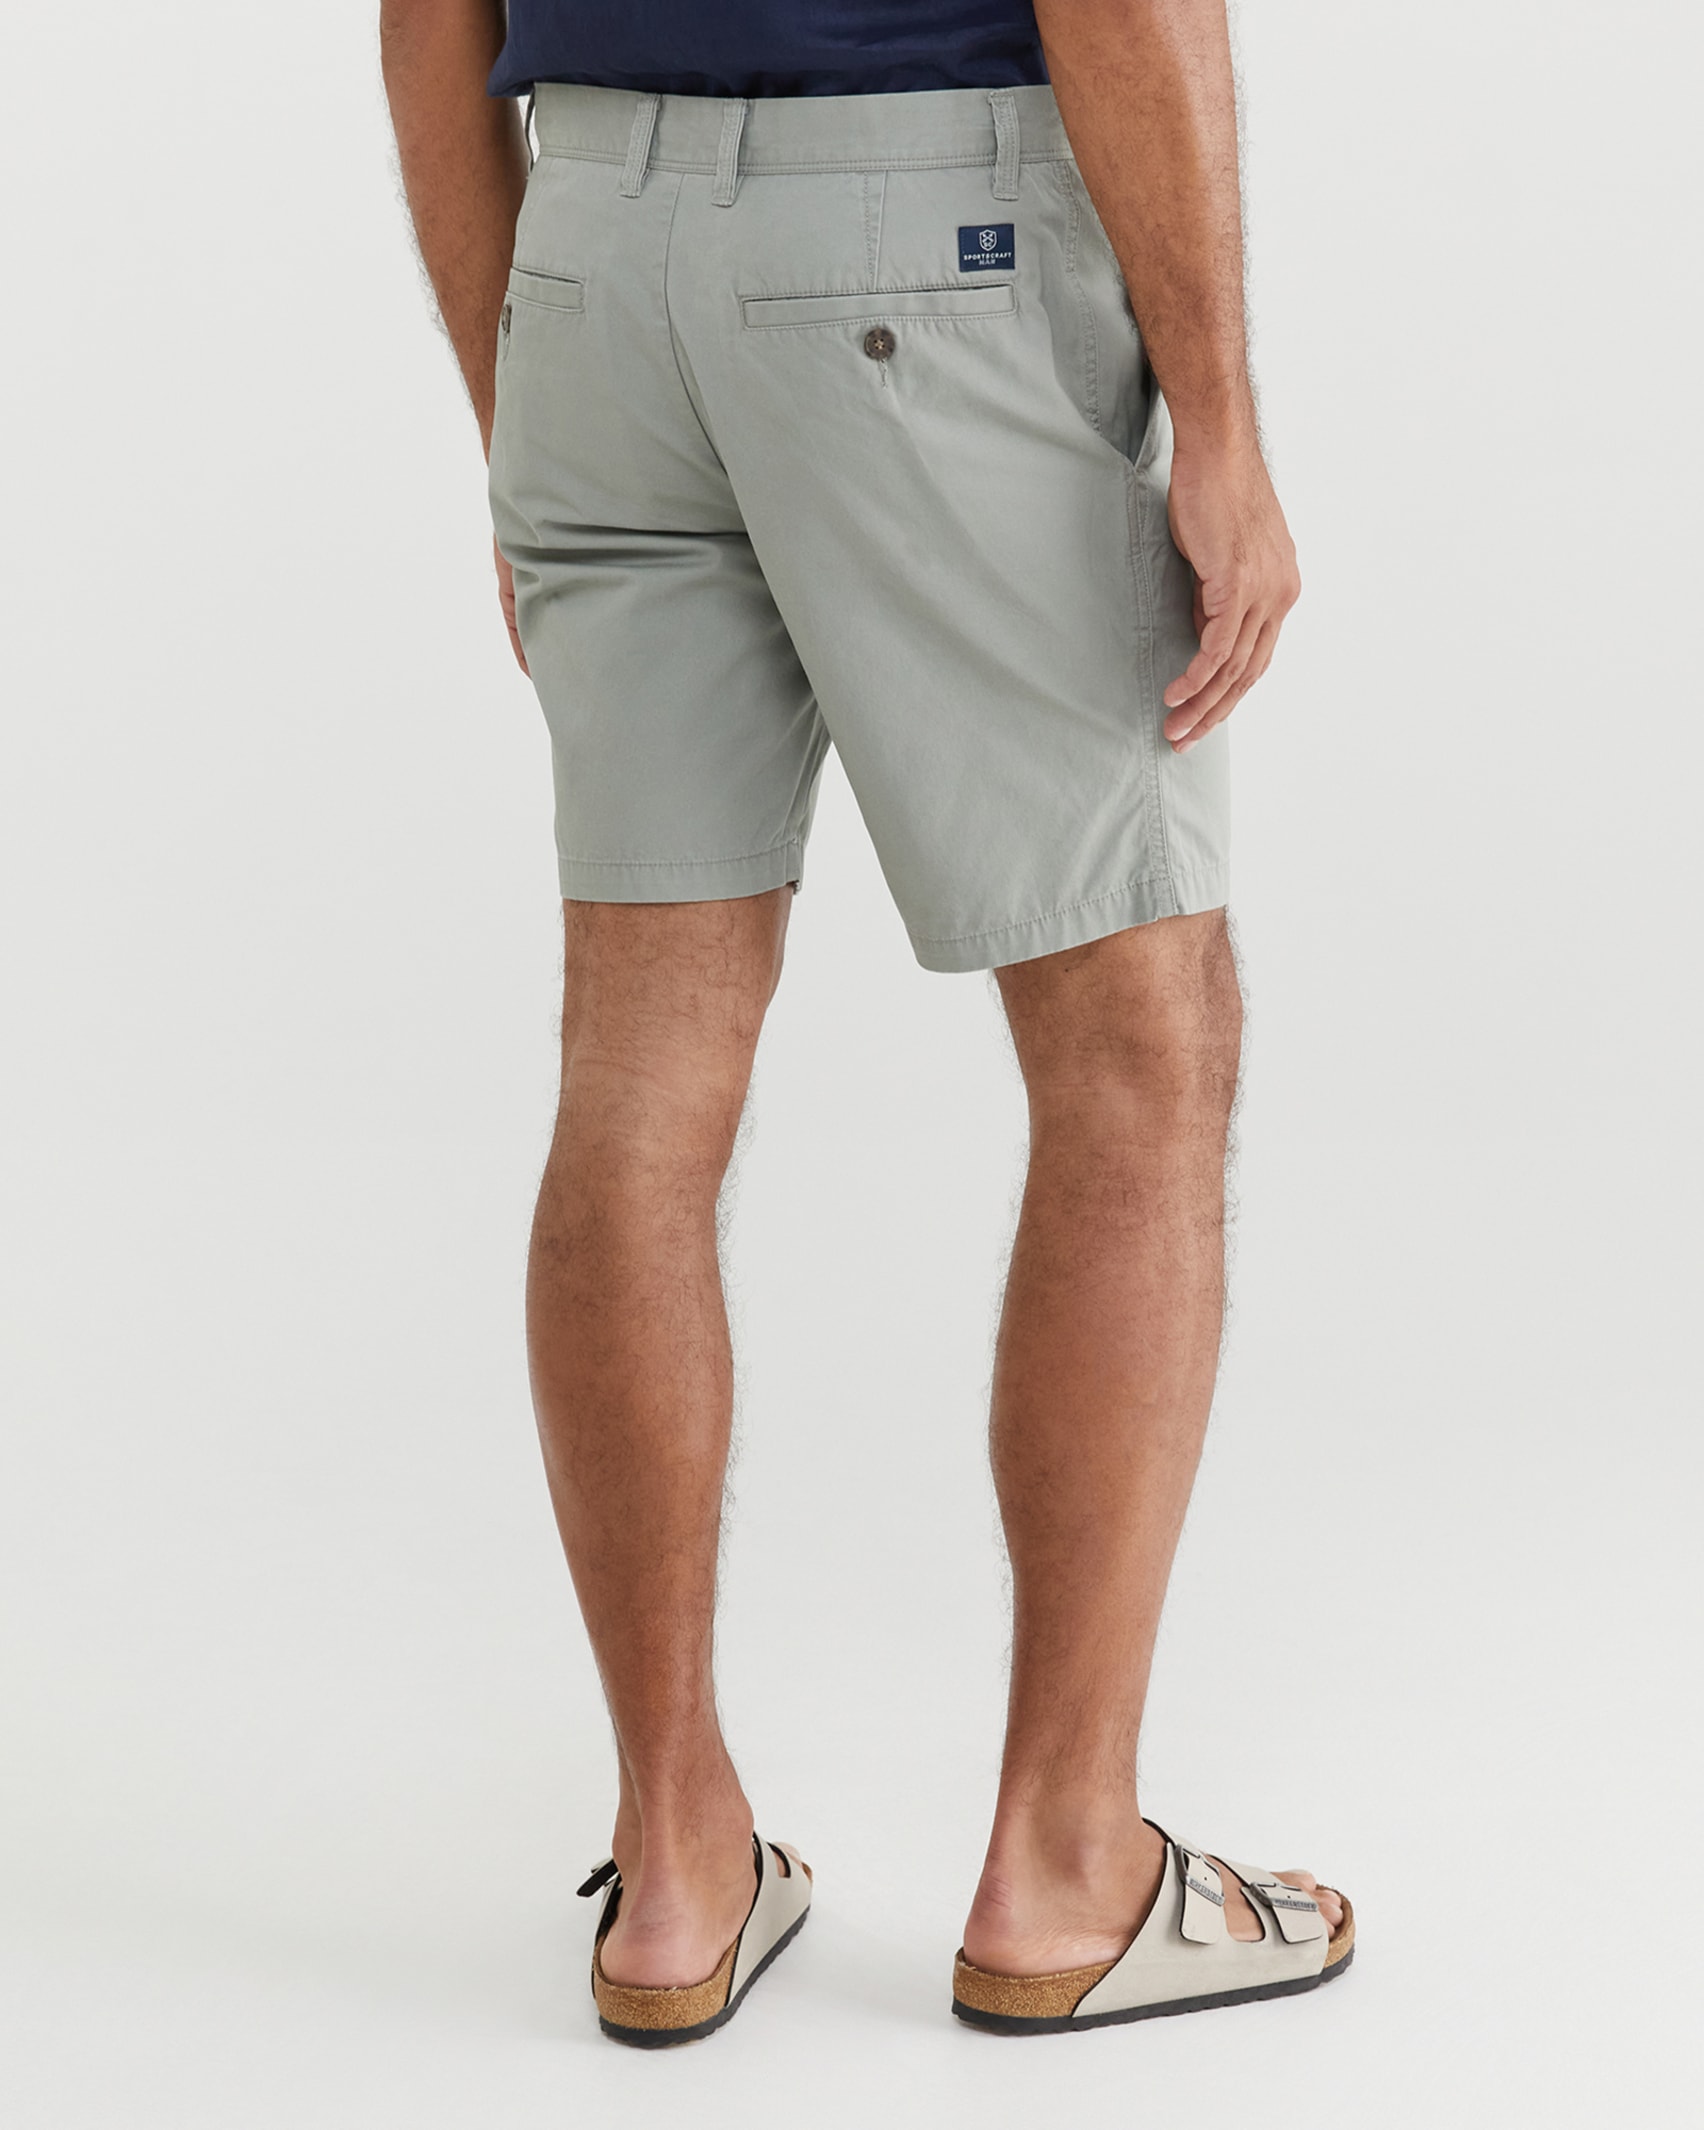 Classic Chino Short in OLIVE